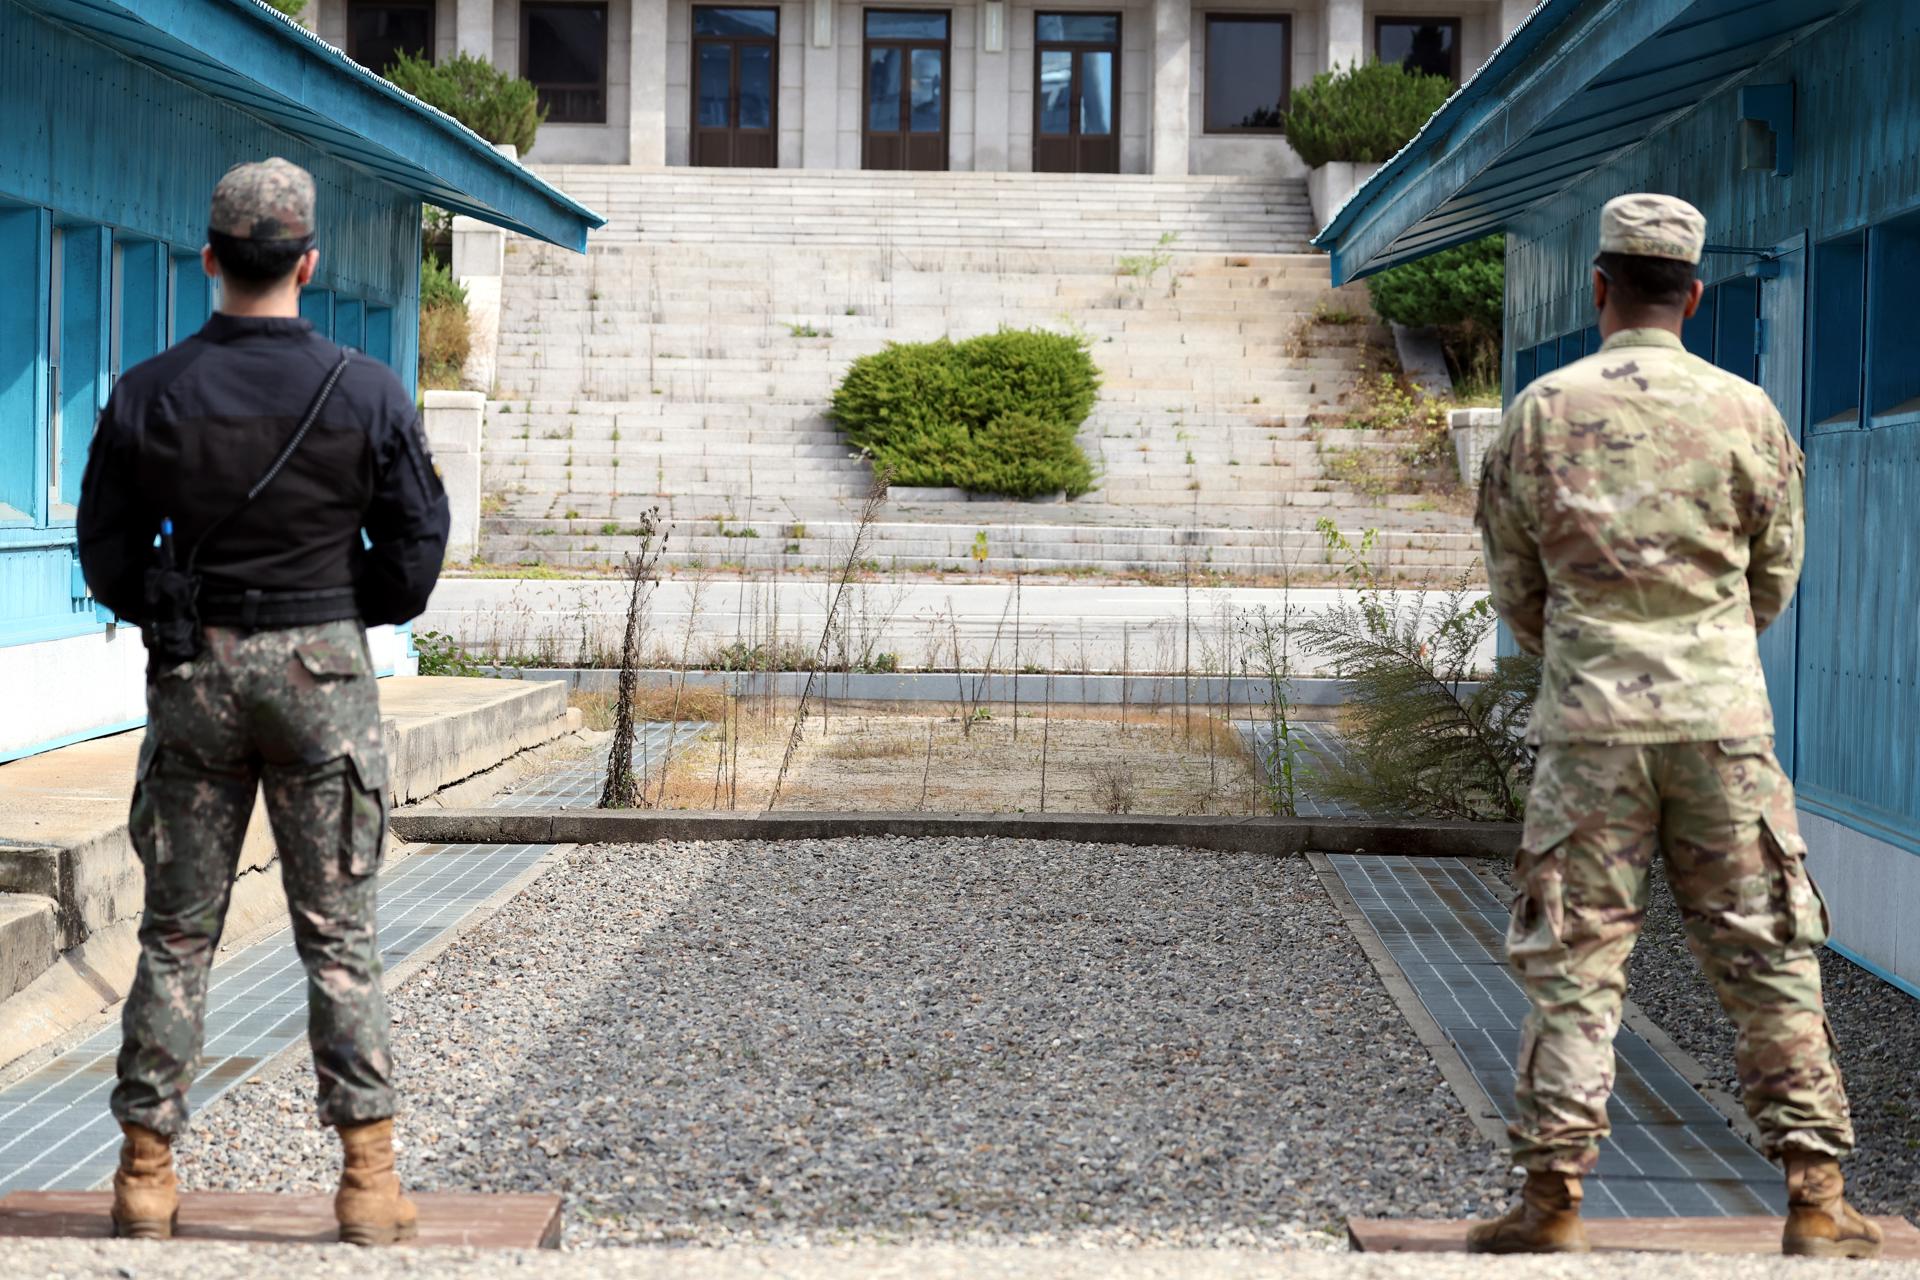 South Korean and US soldier stand guard in the Joint Security Area of the truce village of Panmunjom between South and North Korea inside the Demilitarized Zone, which separates the two Koreas, during a press tour of the village in Paju, South Korea, 4 October 2022. EFE/EPA/YONHAP / POOL SOUTH KOREA OUT[SOUTH KOREA OUT]